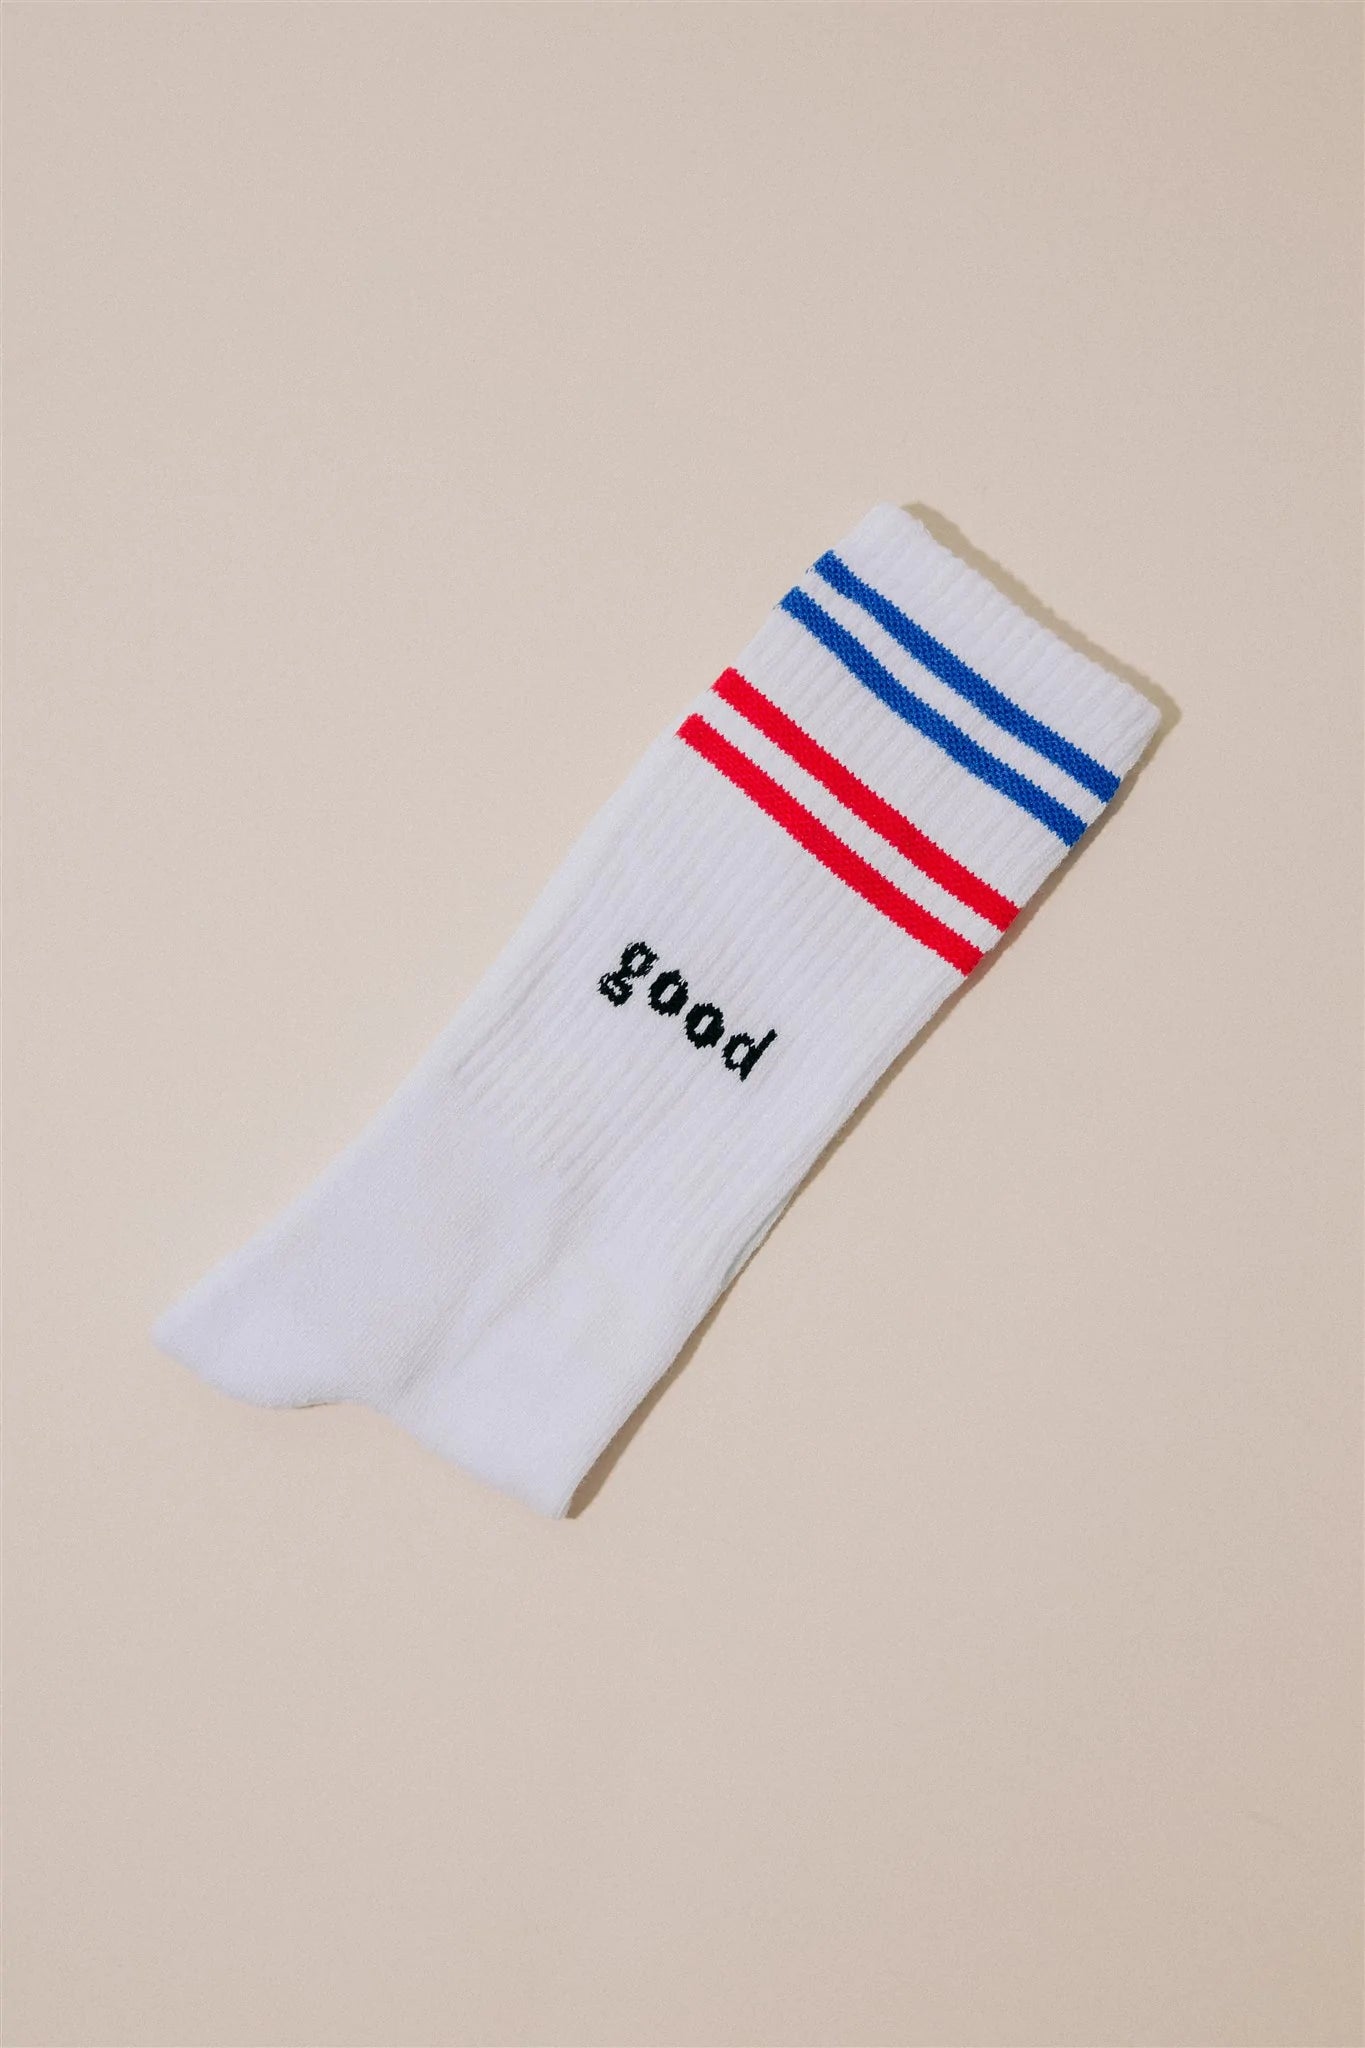 good socks athletics socks in classic with a blue and red stripe